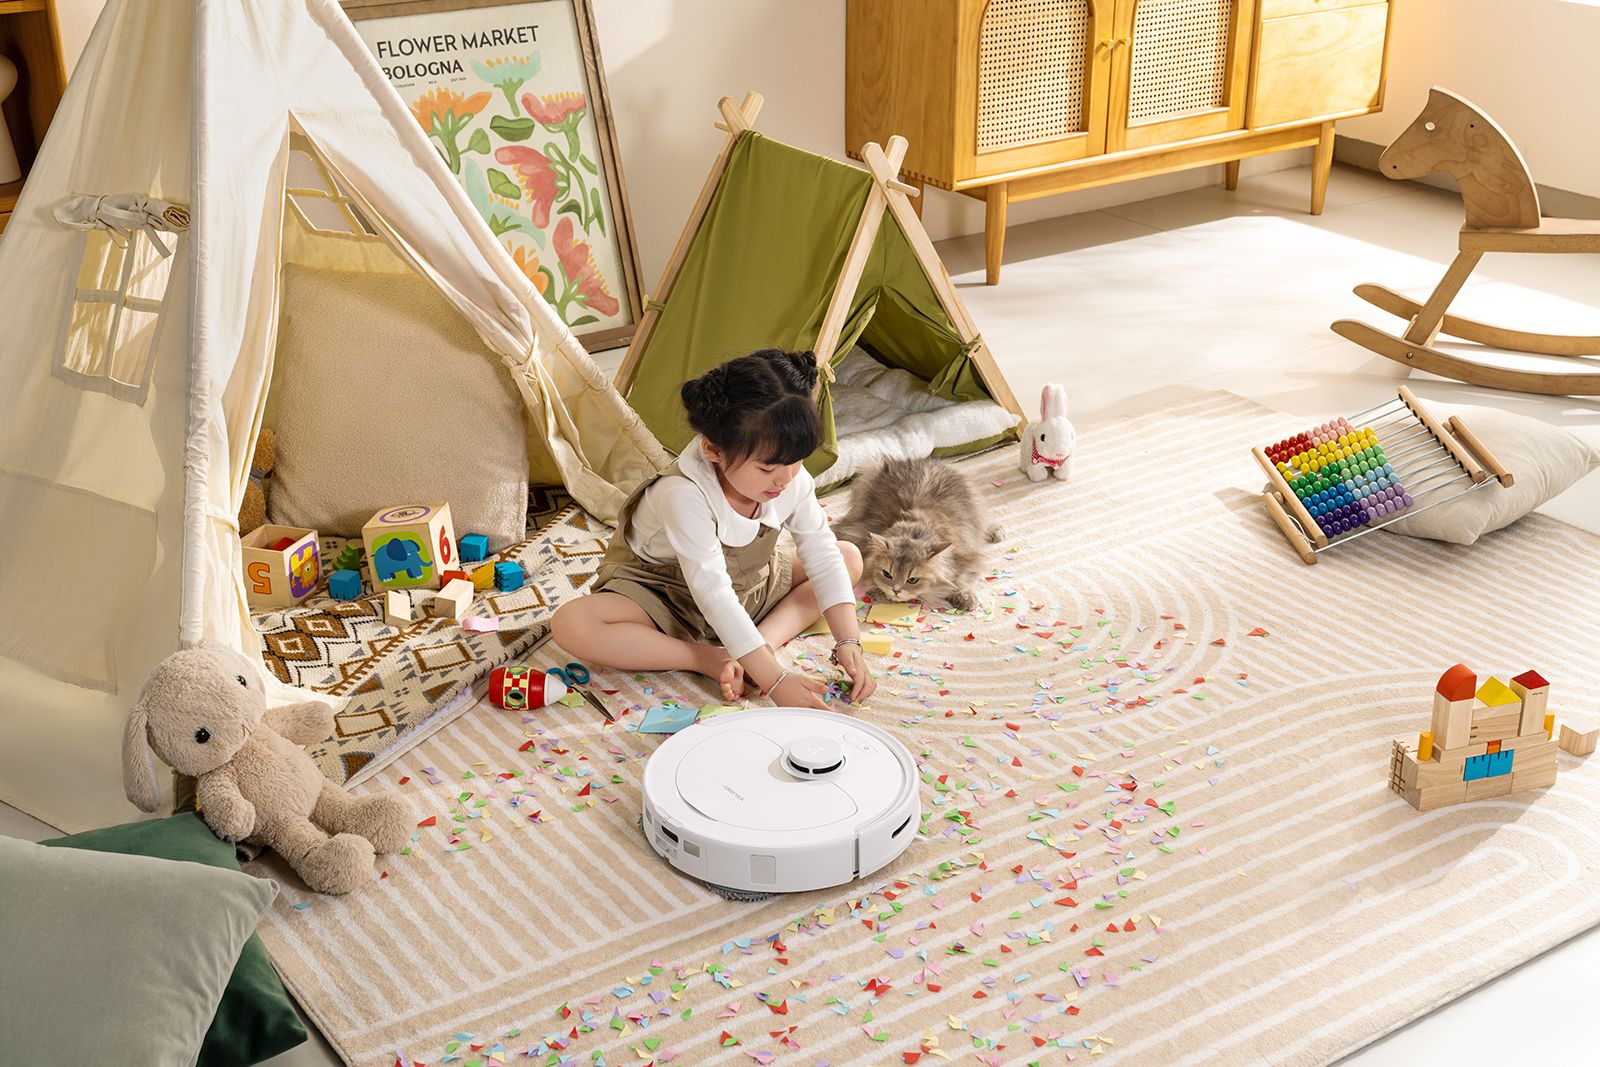 The Roborock Q Revo vacuum cleans while the little girl plays with toys